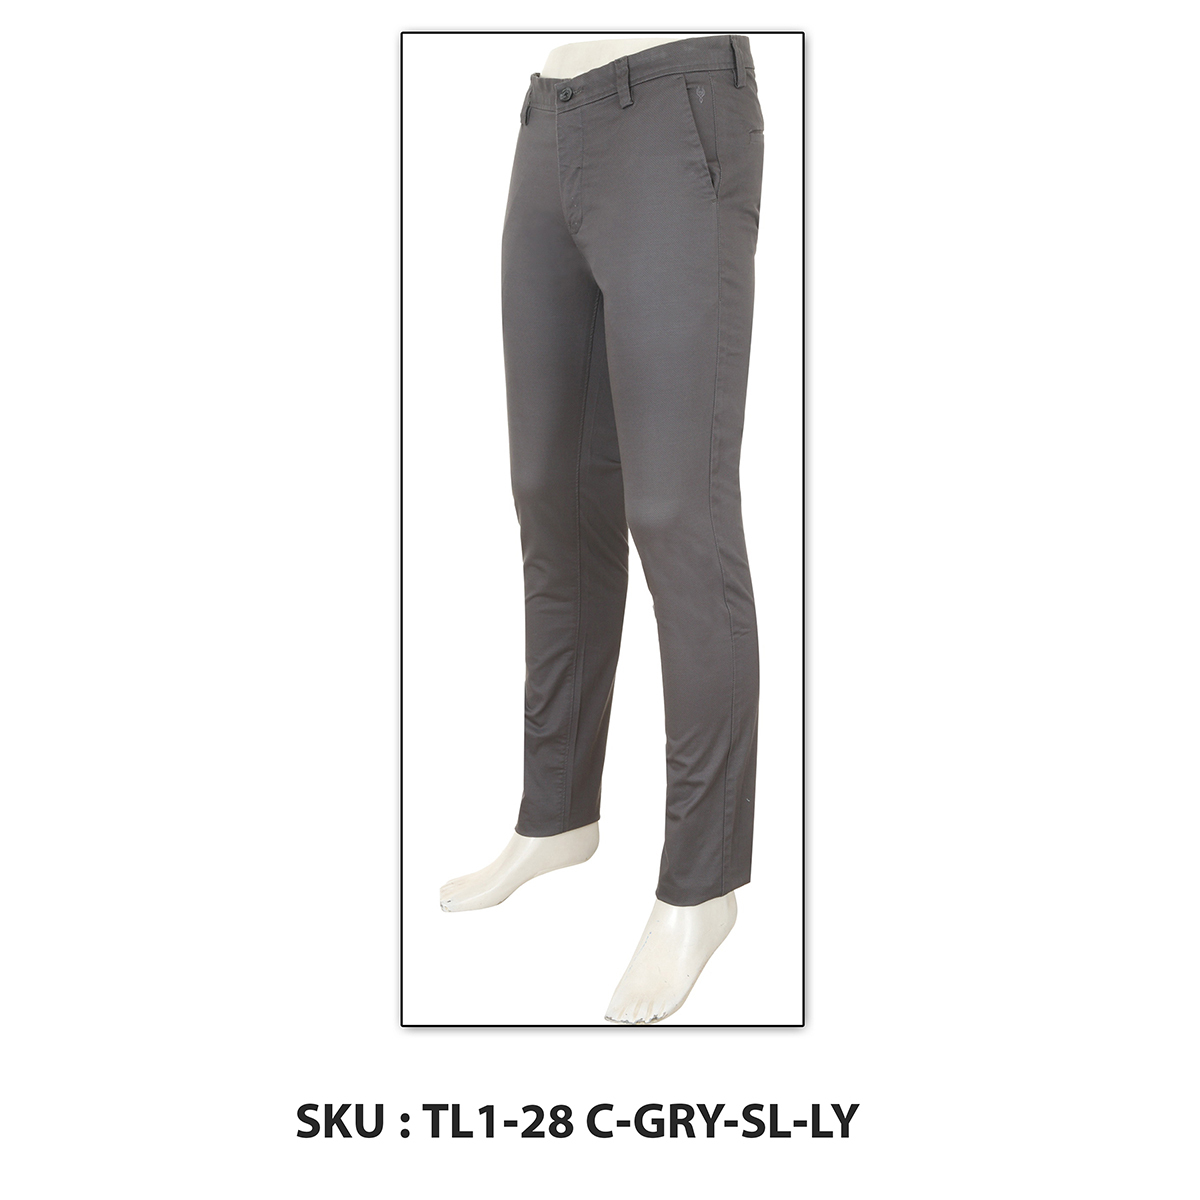 Classic Polo Mens Trousers Tl1-28 C-Gry-Sl-Ly Grey 40